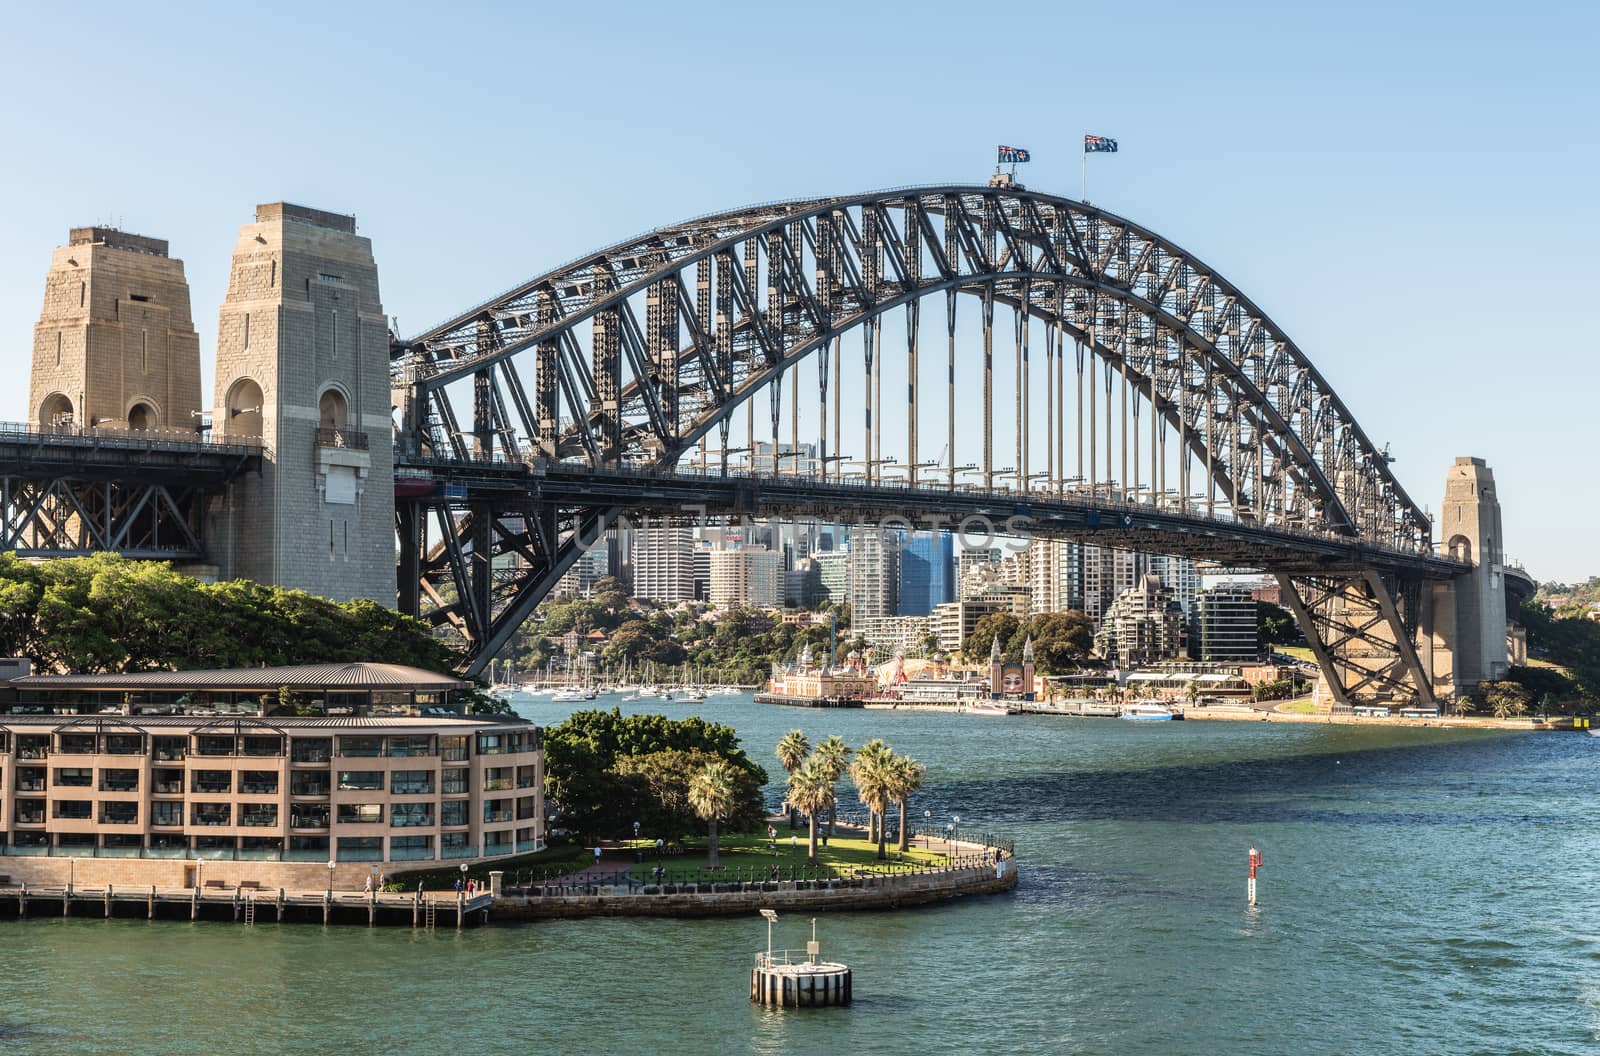 Sydney, Australia - February 12, 2019: Harbour bridge against pale blue sky on late afternoon. Horizon is north shore of bay with Kirribilli neighborhood and Luna Park.